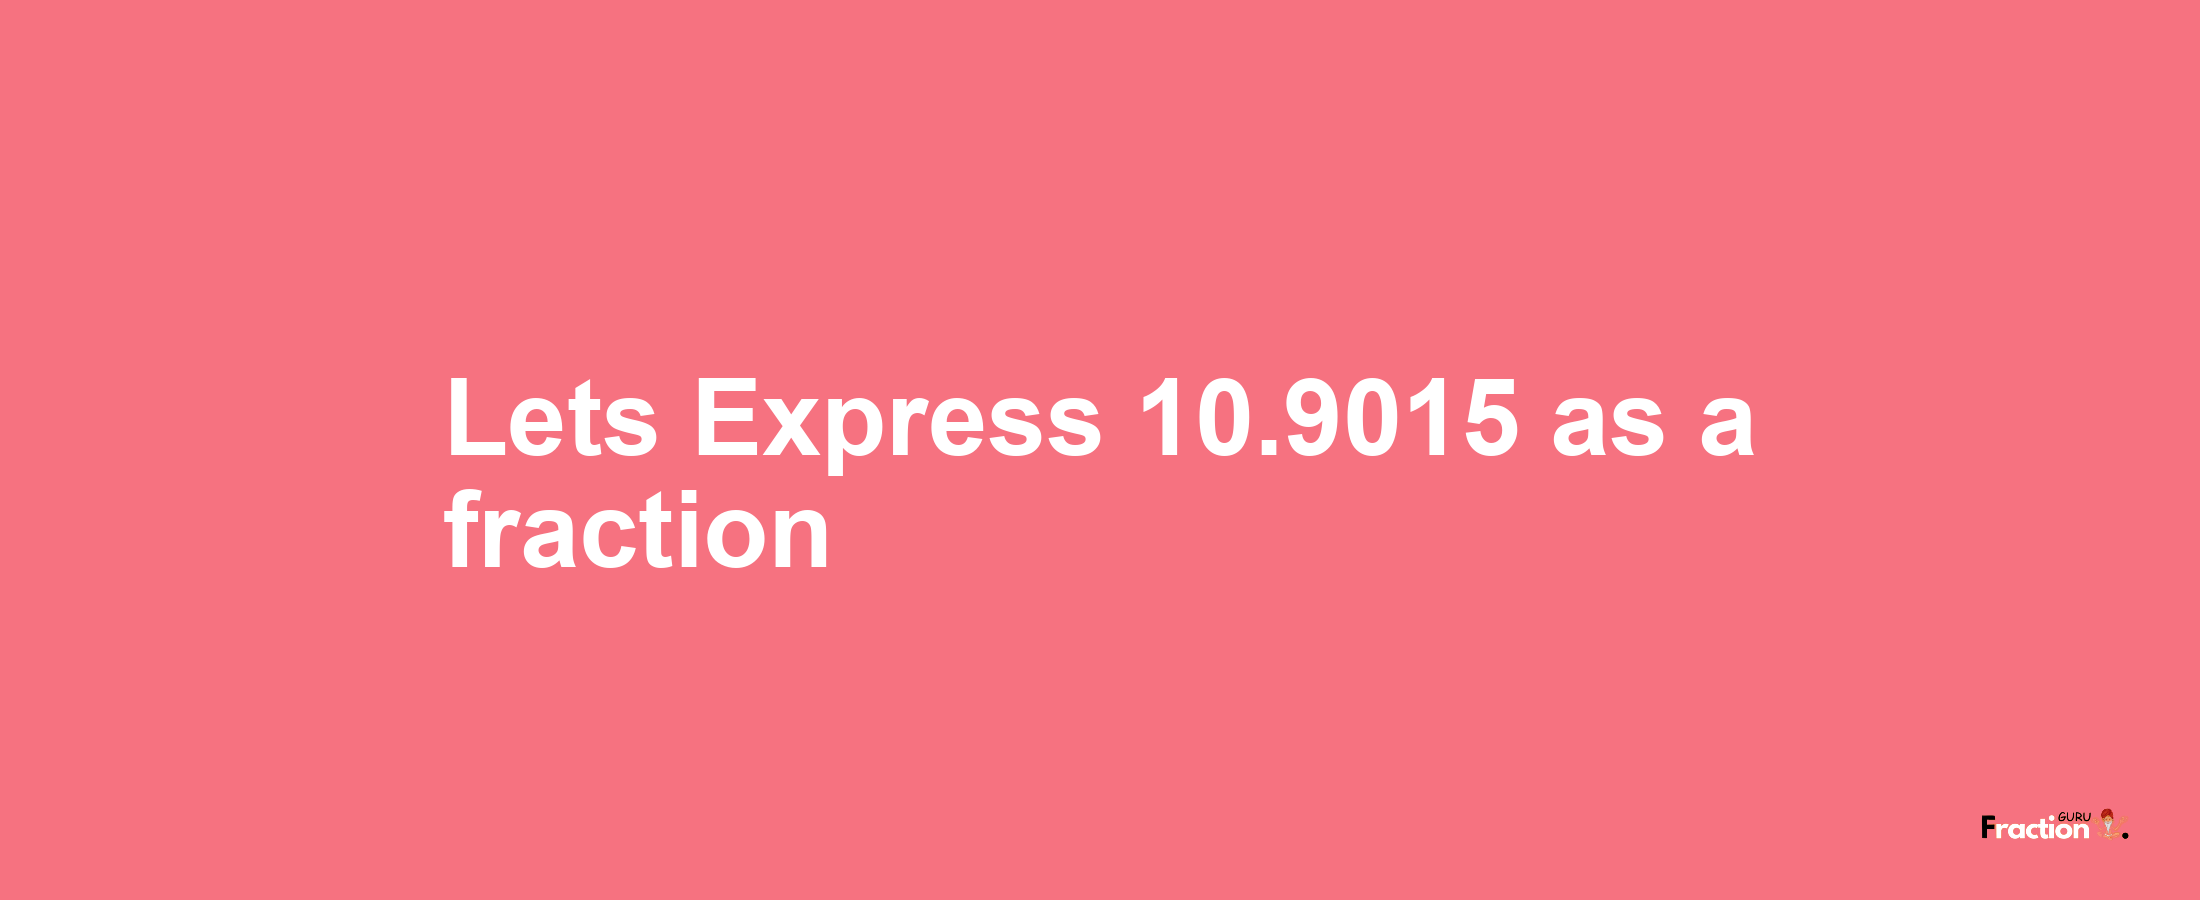 Lets Express 10.9015 as afraction